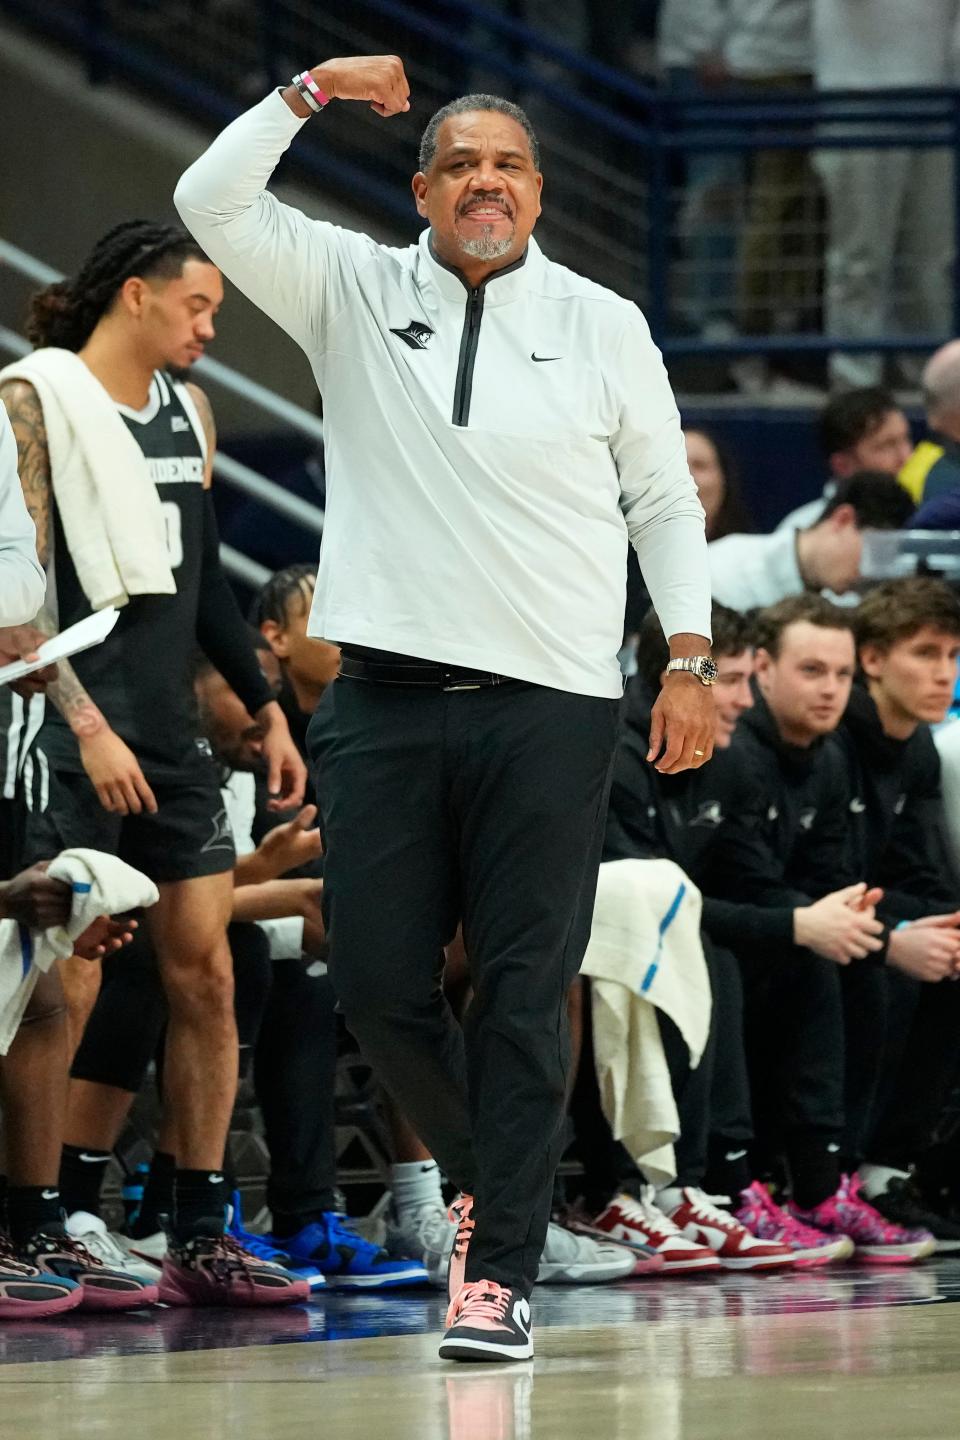 Feb 22, 2023; Storrs, Connecticut, USA; Providence Friars head coach Ed Cooley signals during the first half against the Connecticut Huskies at Harry A. Gampel Pavilion. Mandatory Credit: Gregory Fisher-USA TODAY Sports